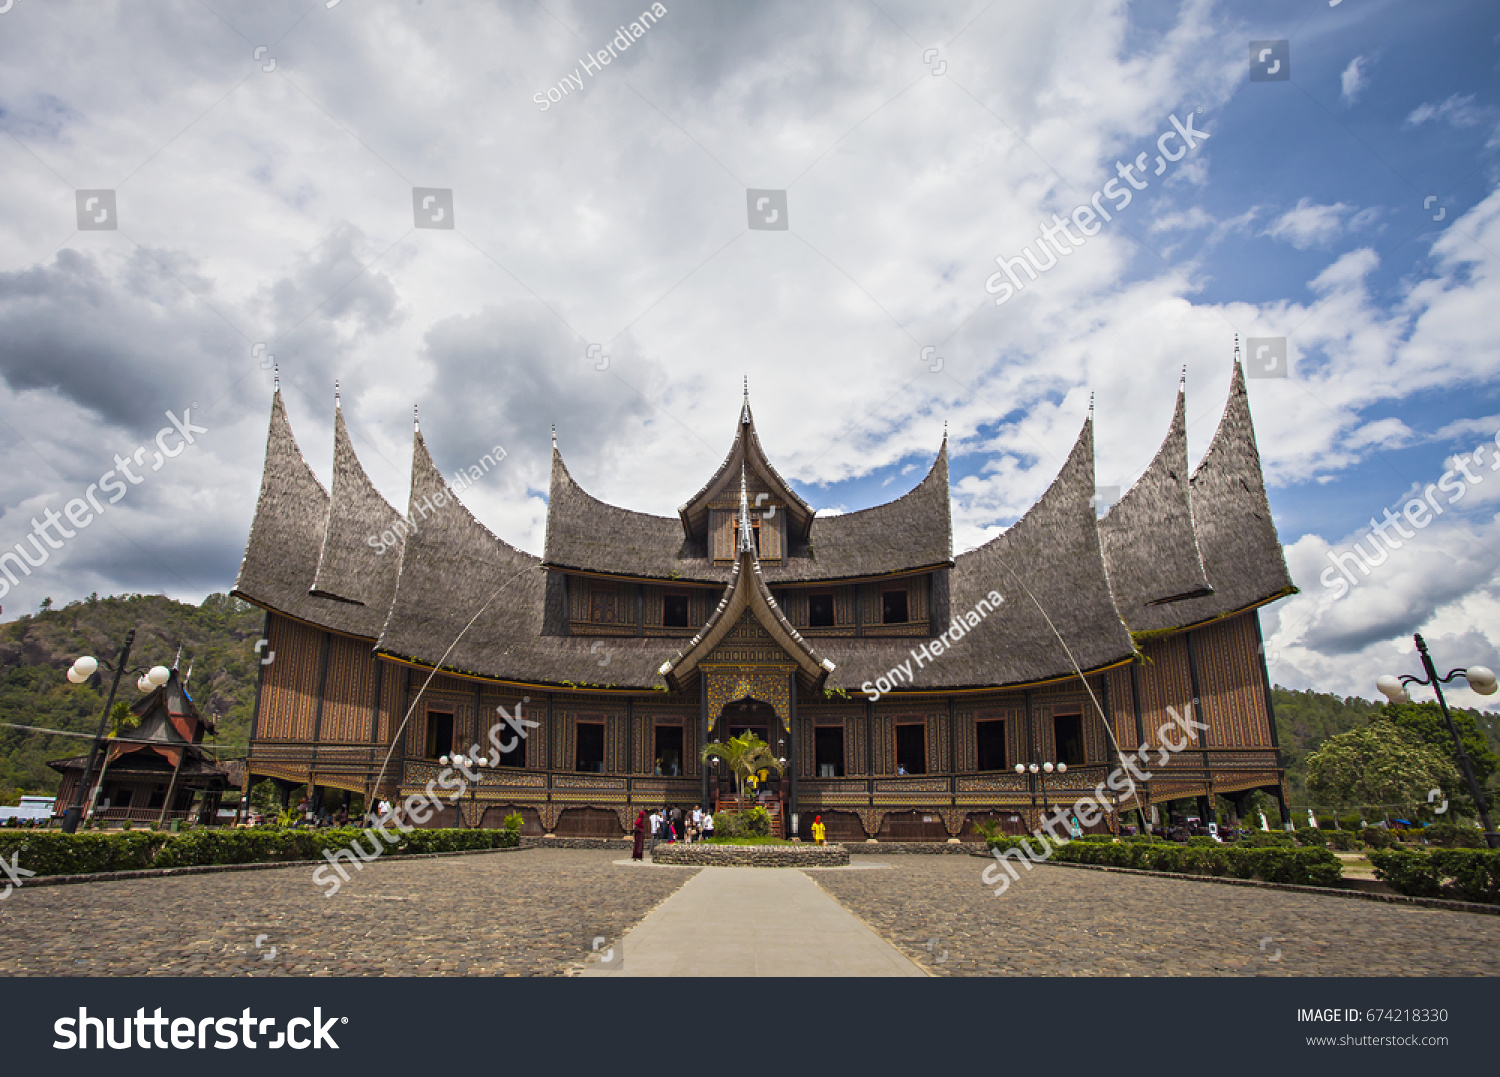 The Famous Istano Baso Pagar Ruyung, a Palace, heritage building with traditional Minangkabau design, a tourist destination in Tanah Datar, West Sumatera, Indonesia #674218330